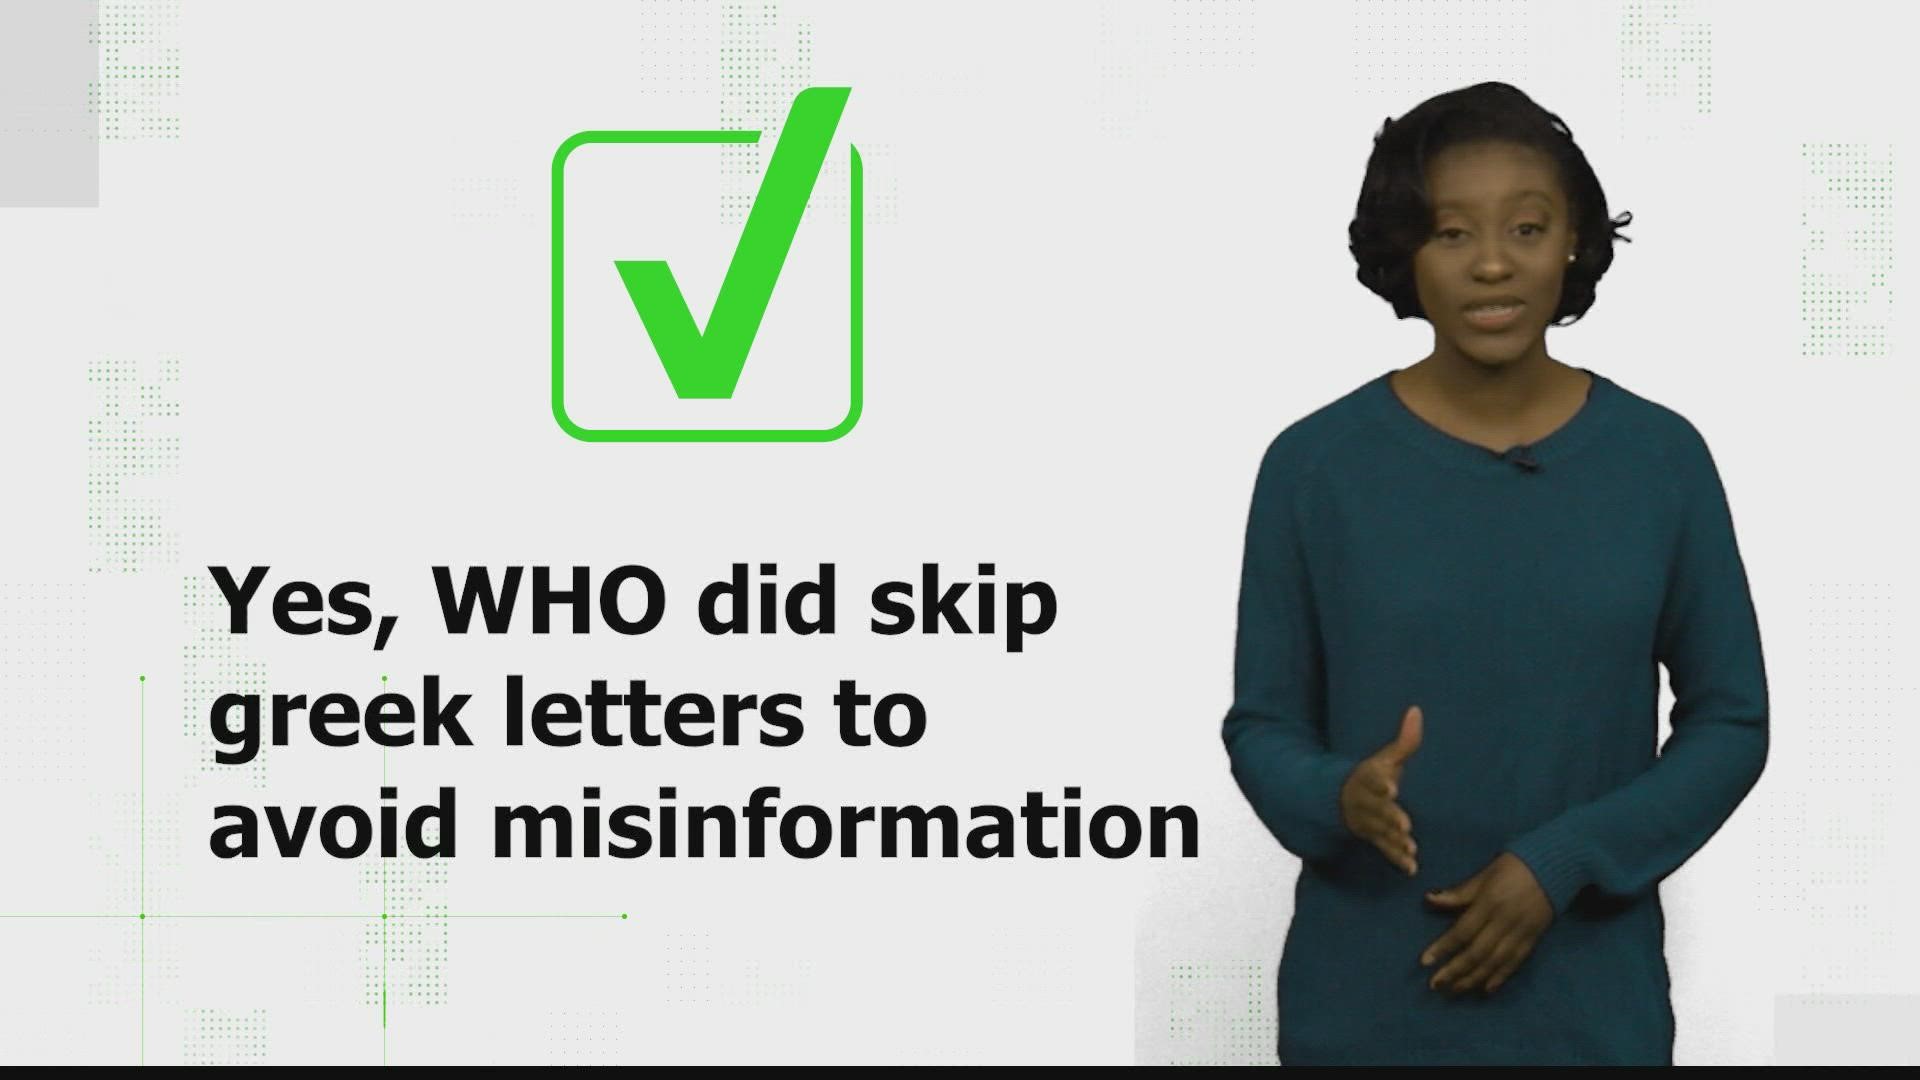 Yes, WHO did skip Greek letters to avoid misinformation. This is still a very new variant that health officials and scientists are learning about.